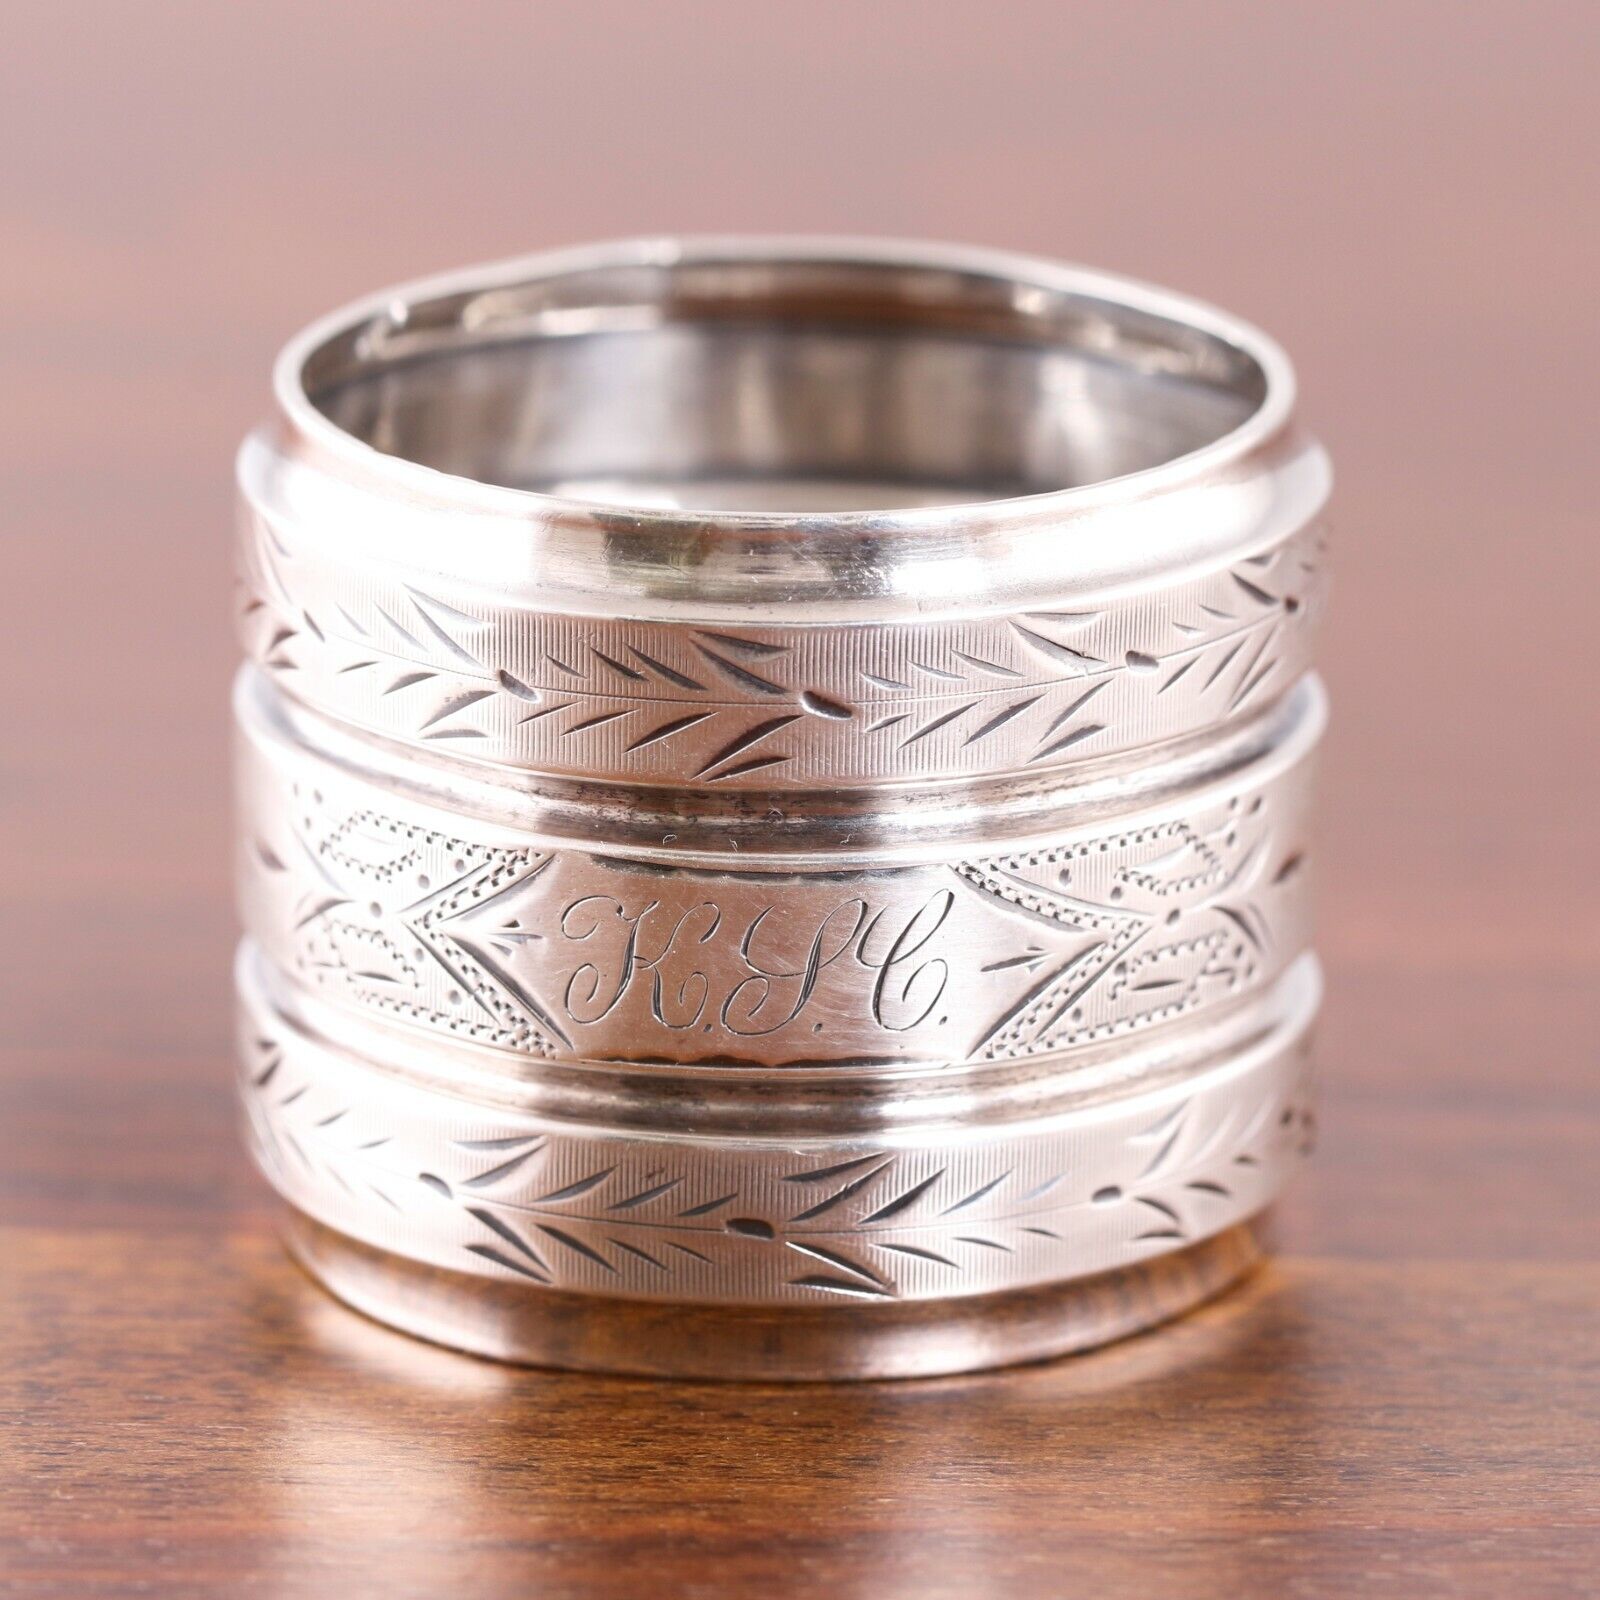 Antique Valuations: AMERICAN AESTHETIC COIN SILVER NAPKIN RING ENGINE TURNED GEOMETRIC ENGRAVING